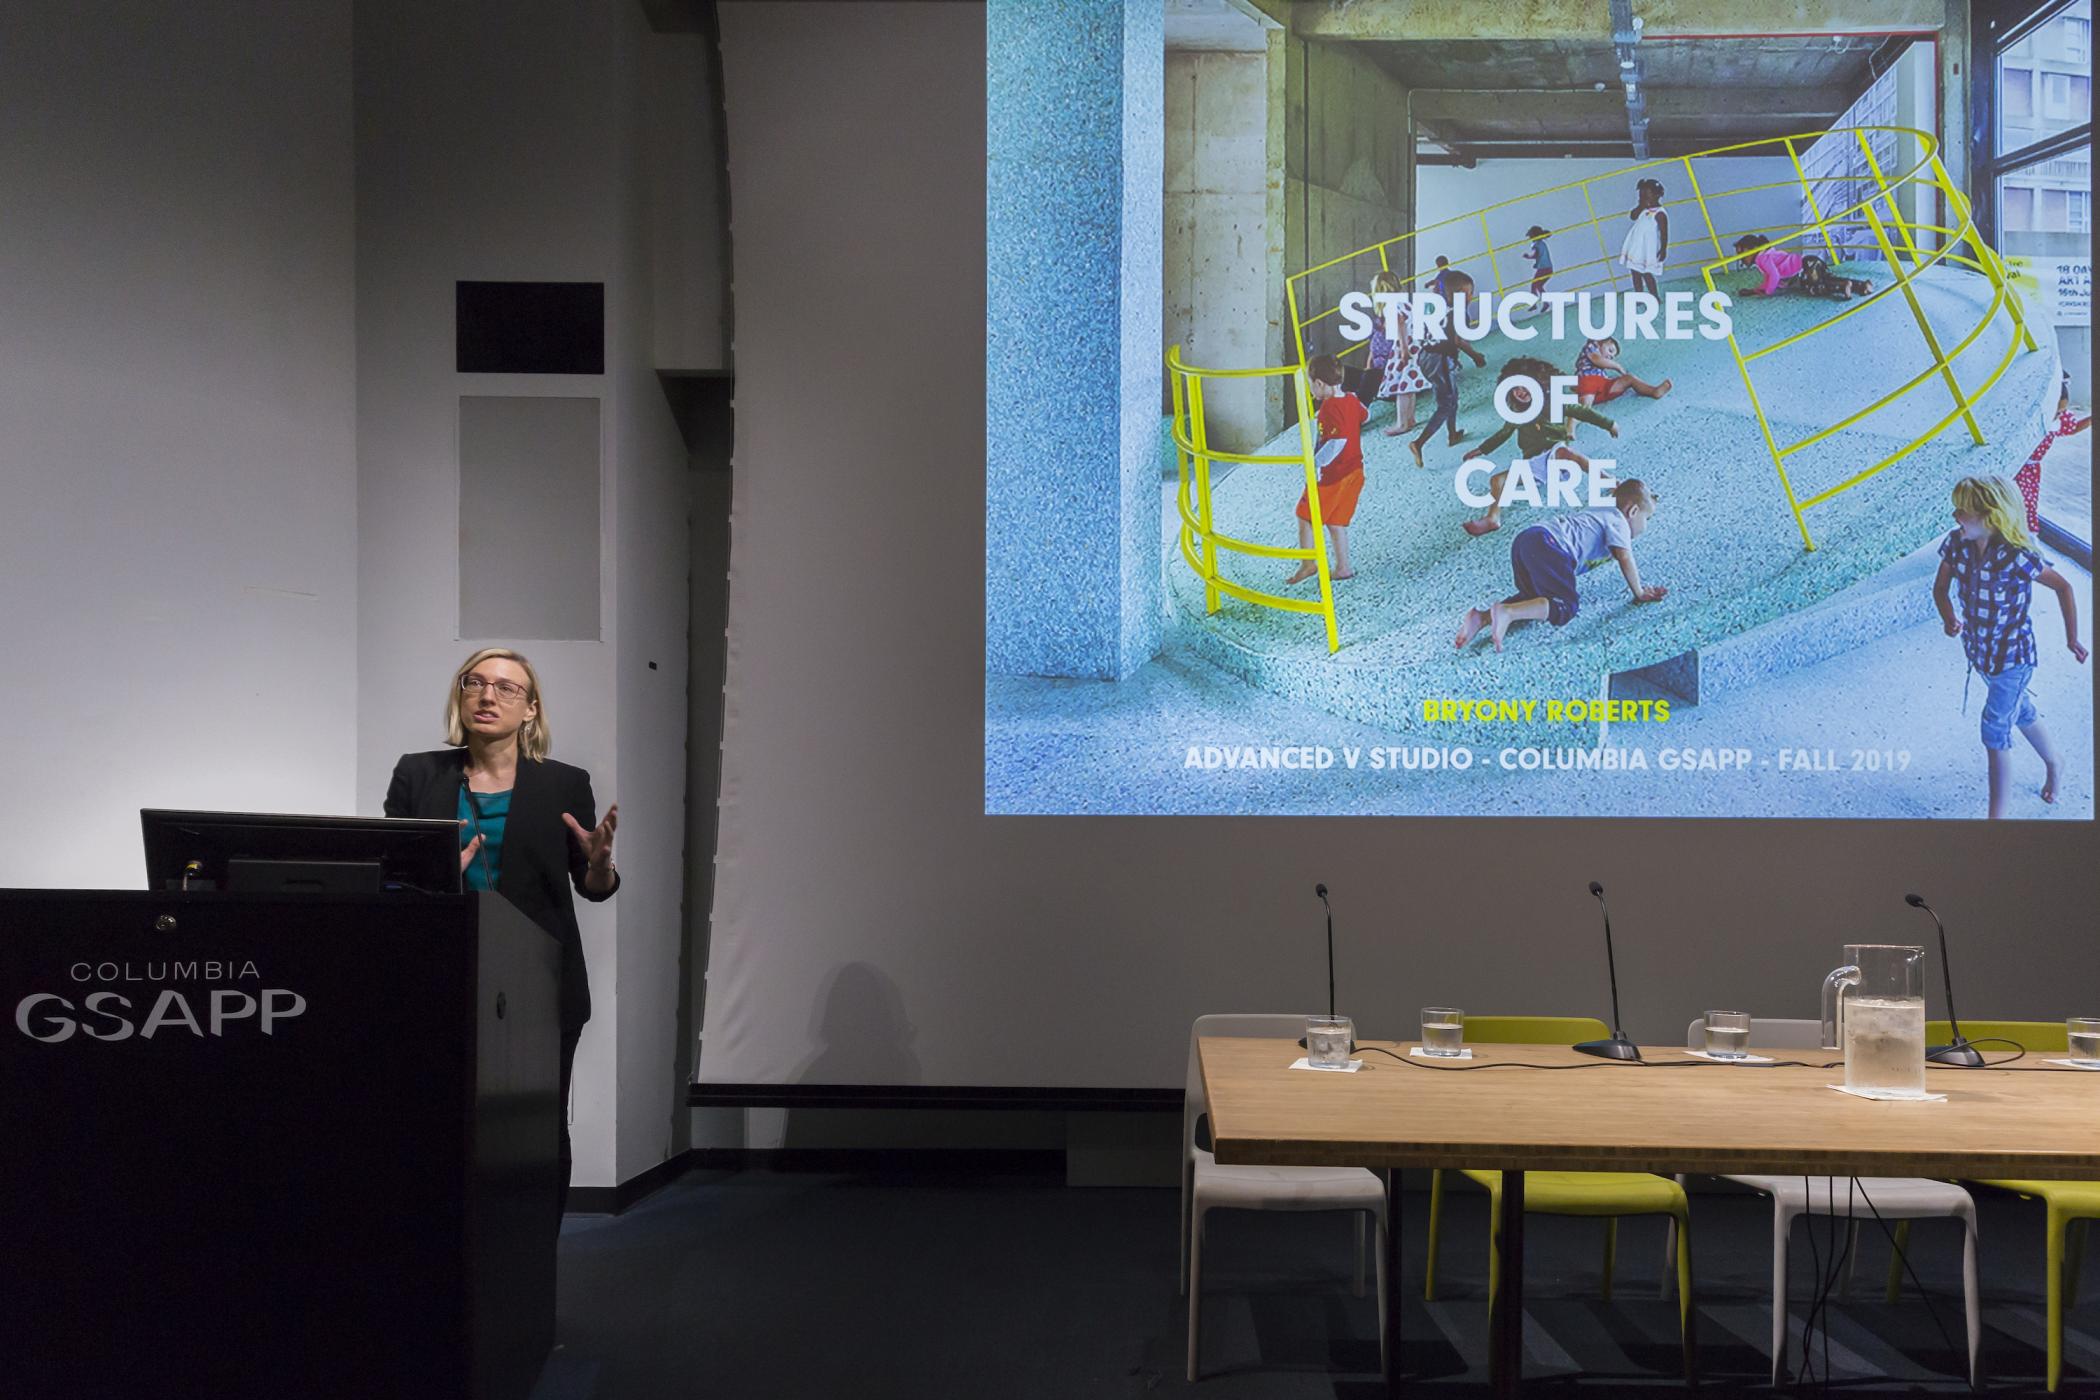 Bryony Roberts stands at a podium gesticulating beside a slide showing children playing on a tilted platform with text saying "structures of care"